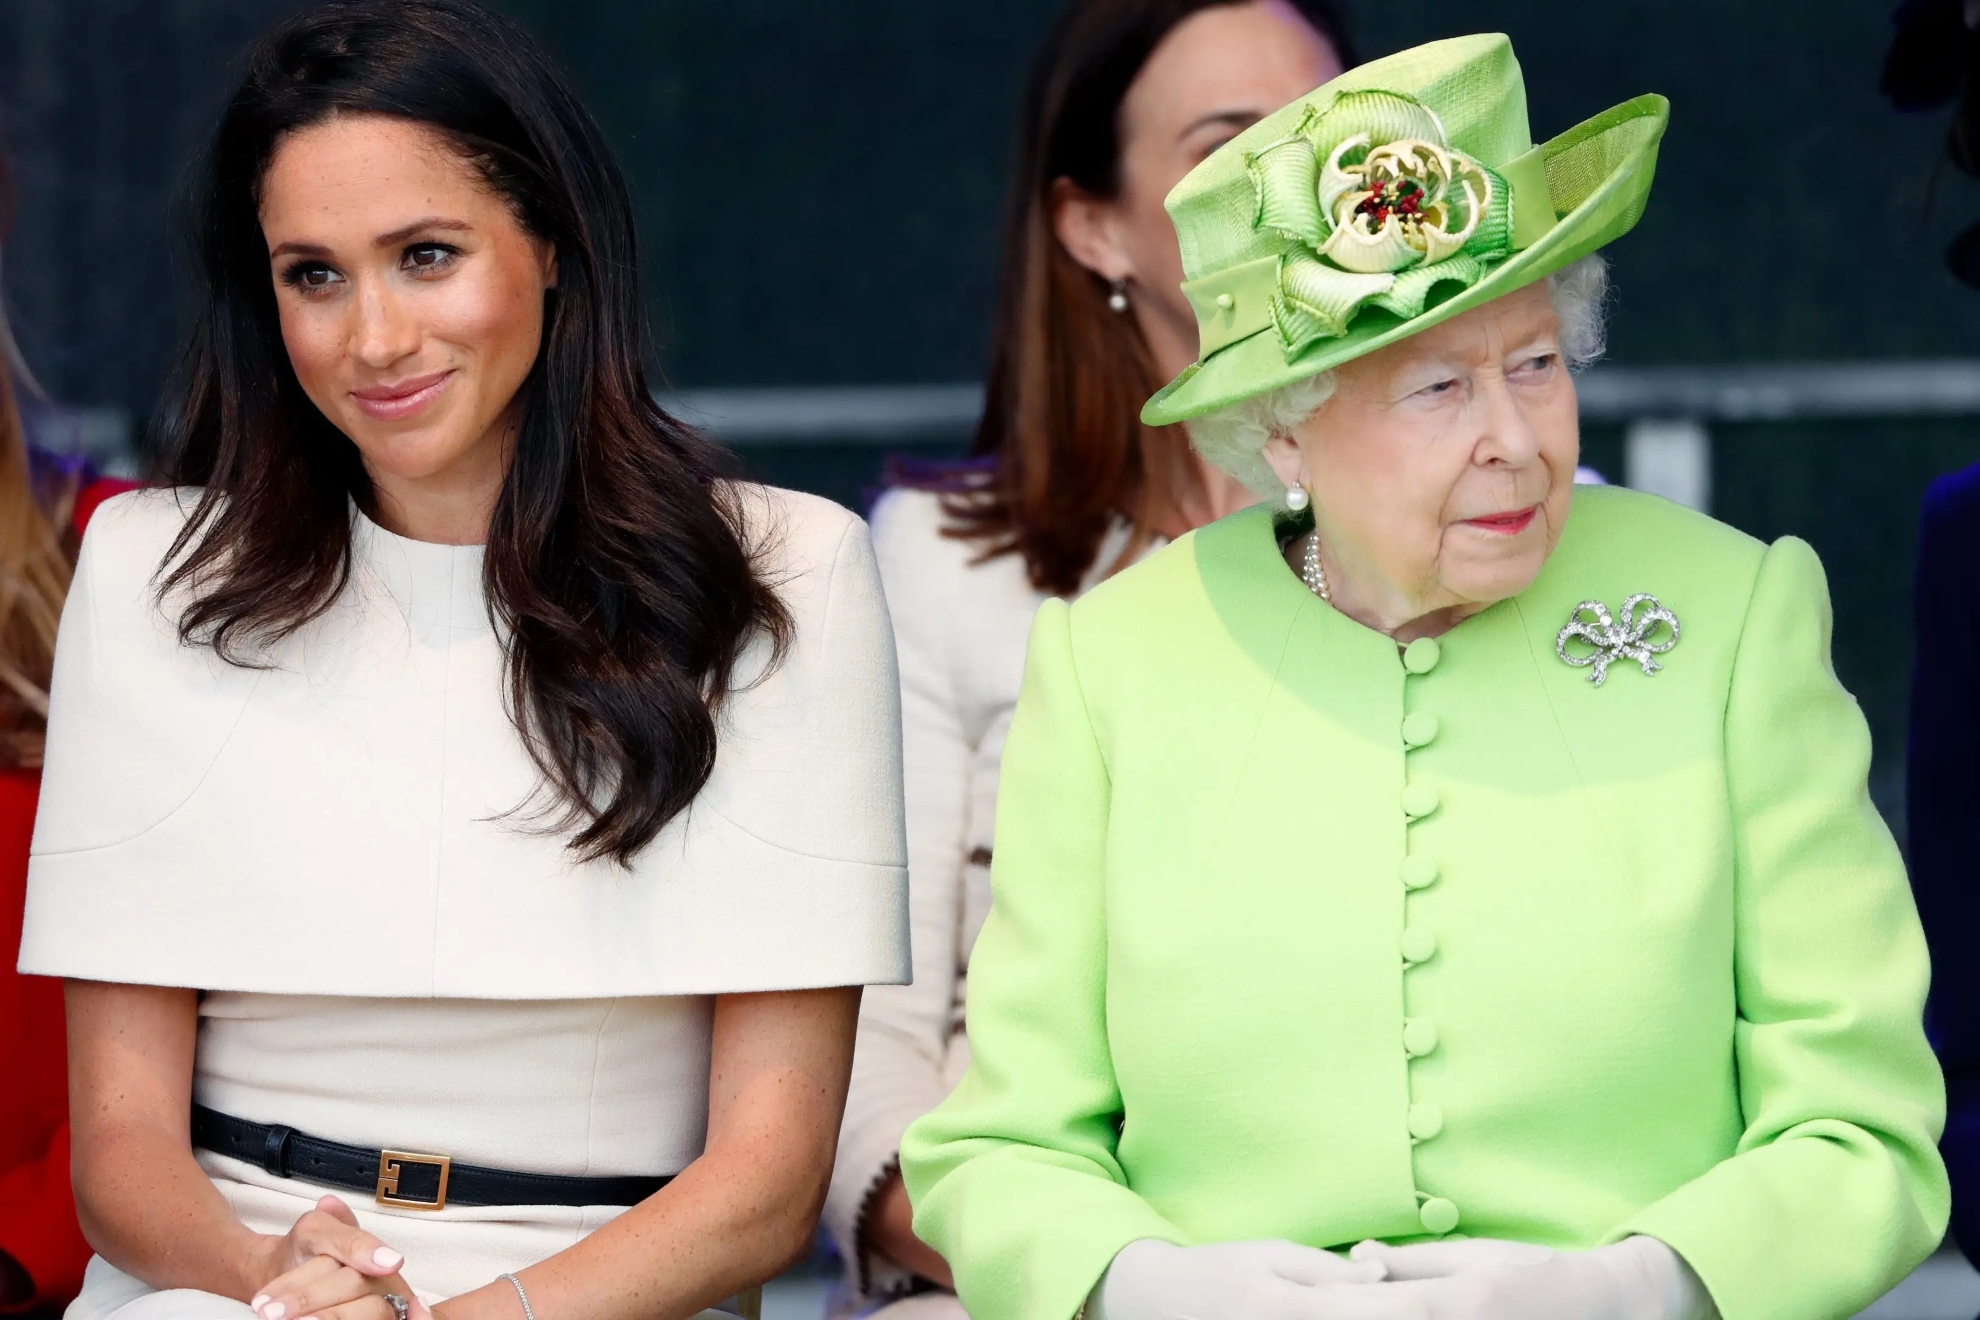 The relationship between Meghan Markle and Queen Elizabeth II was certainly a complicated one